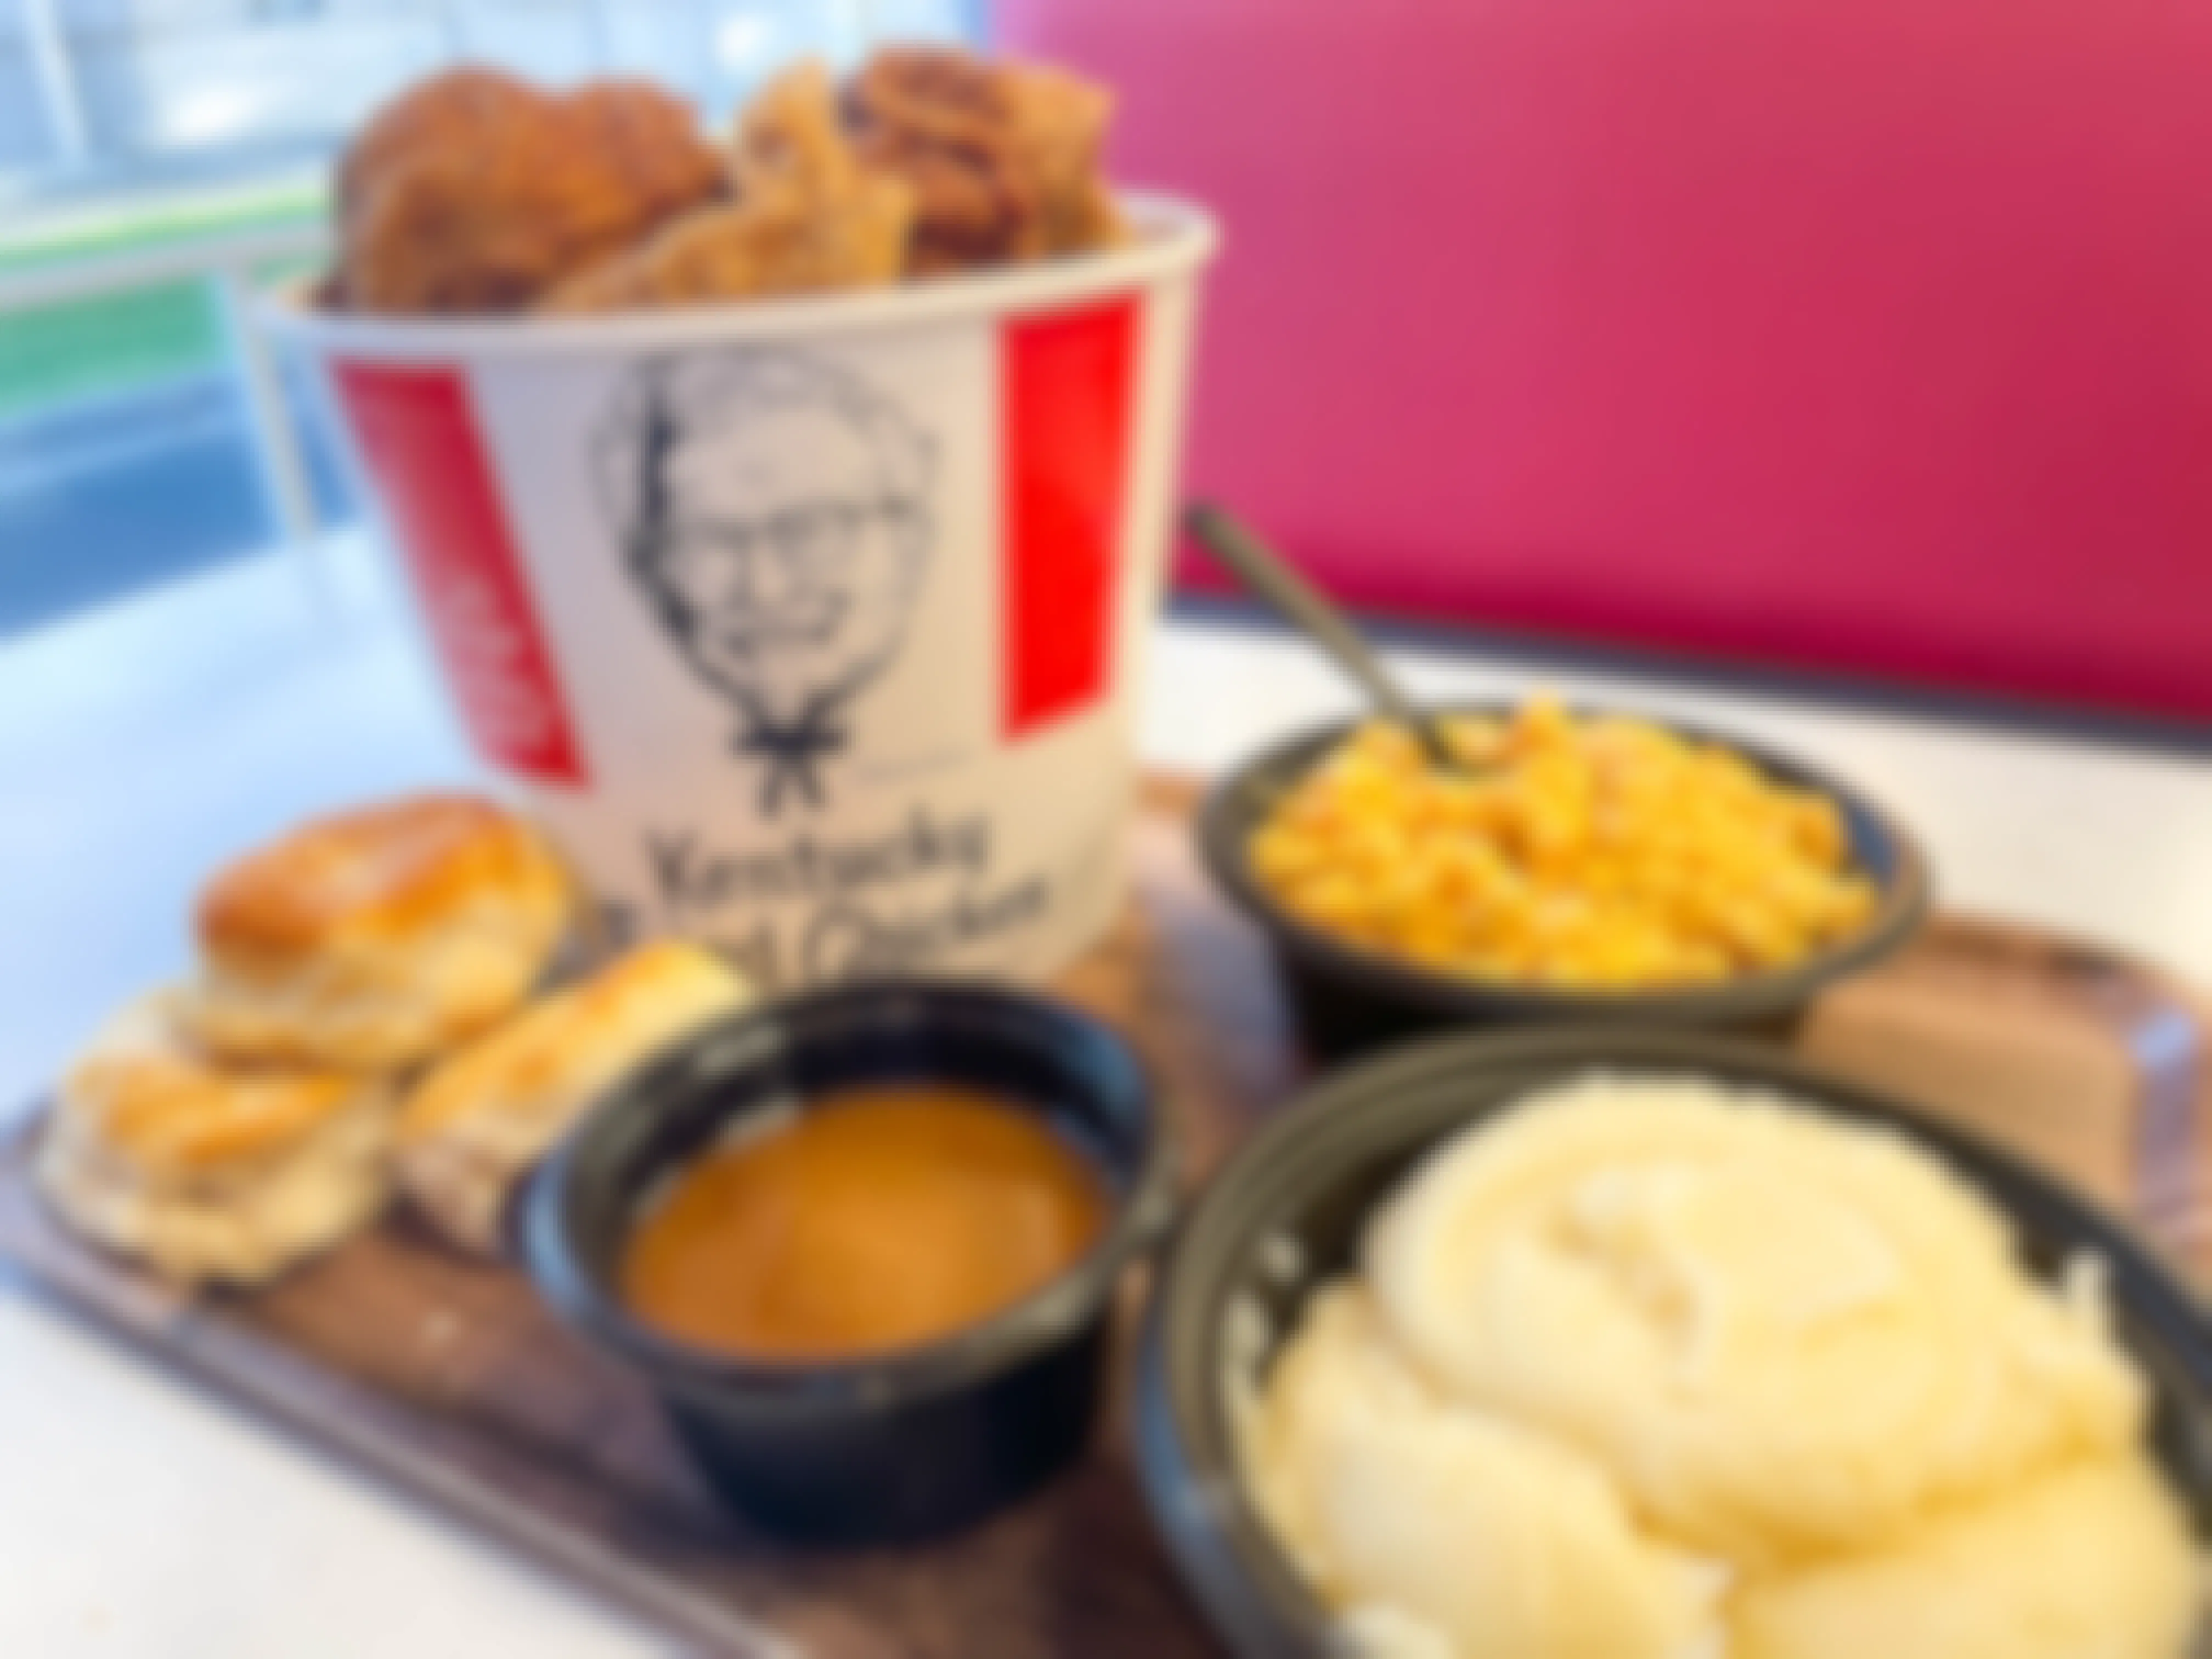 kfc bucket of chicken and meal on table